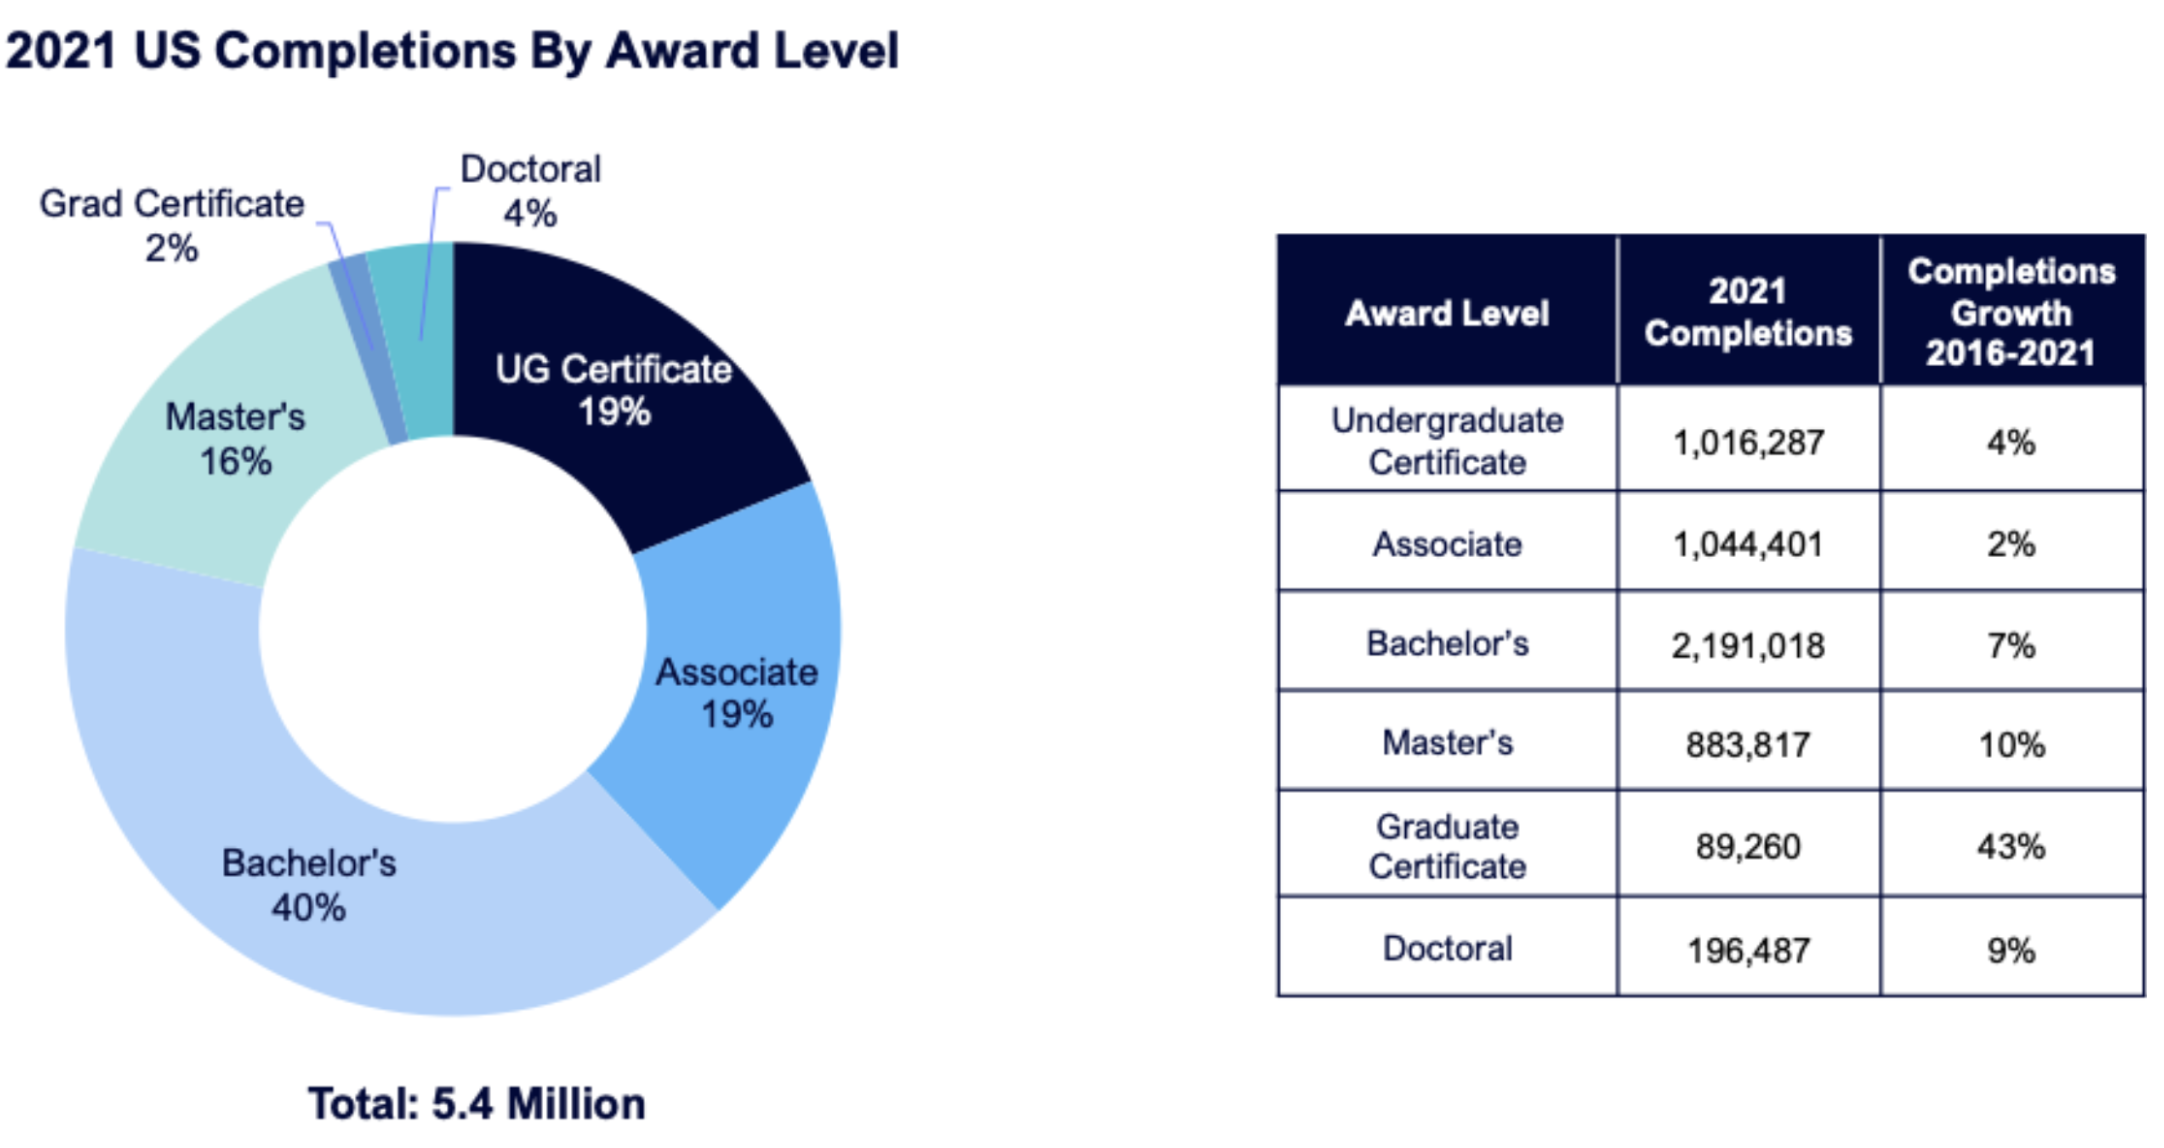 2021 US completions by award level